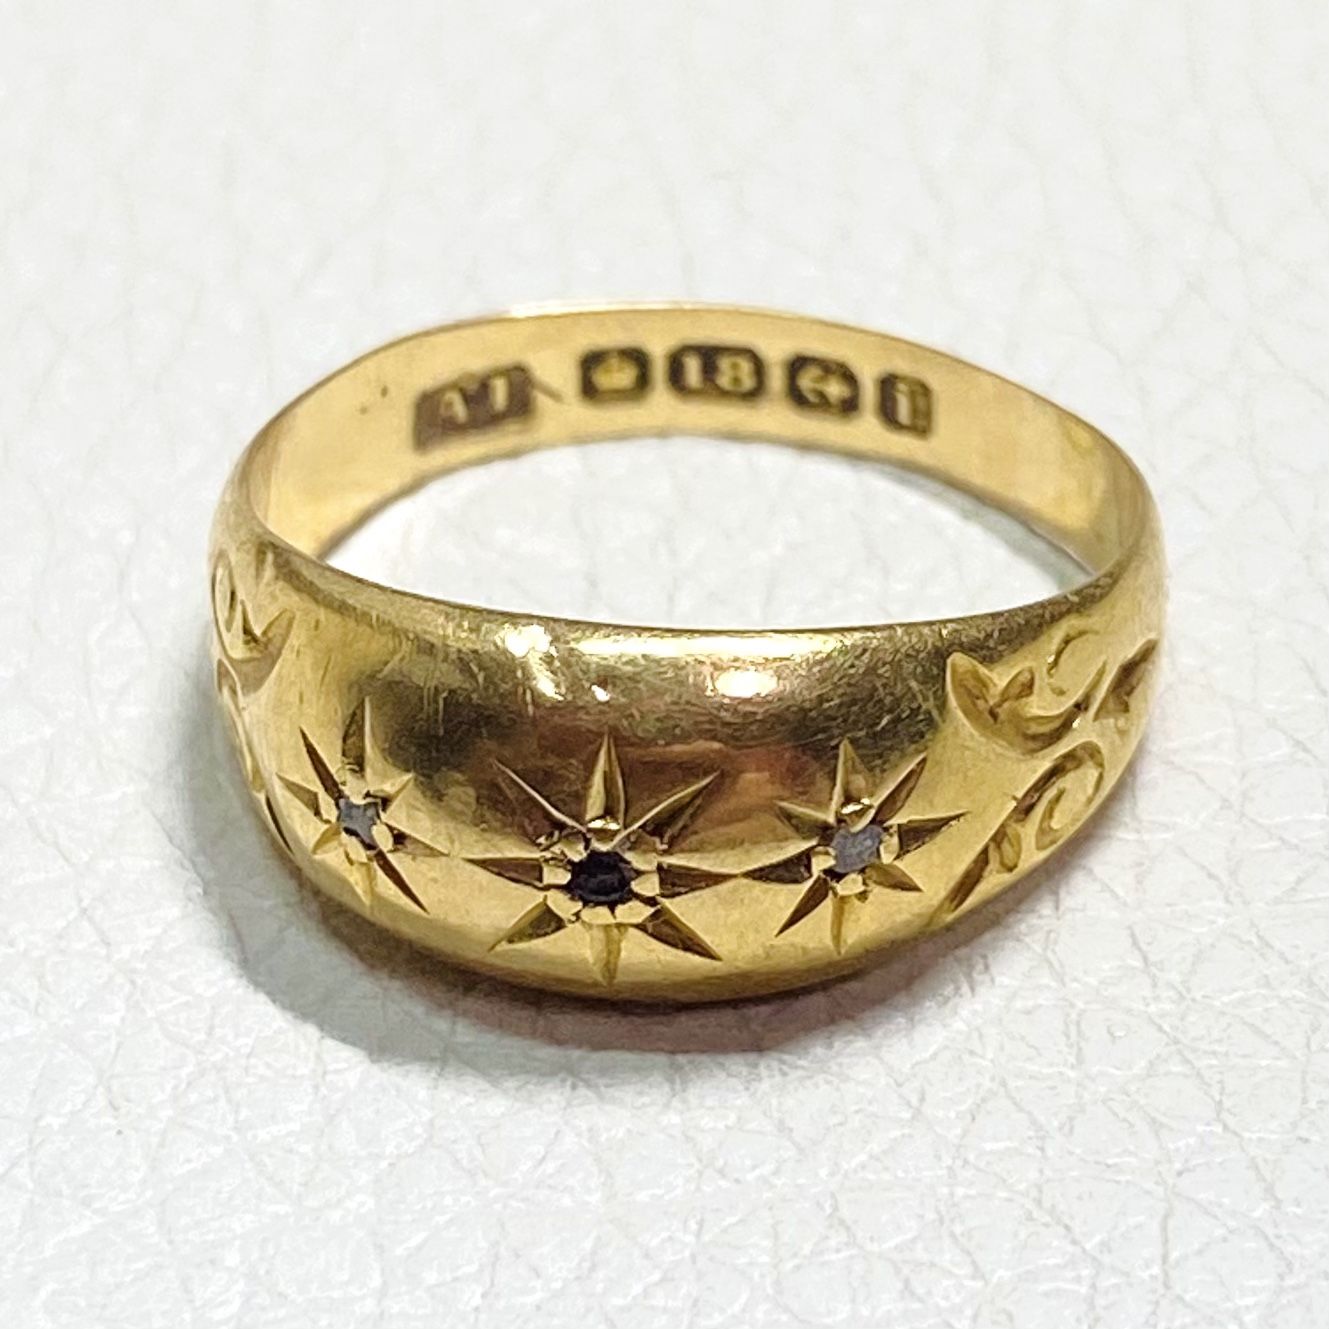 Antique 1908 Diamond Chip and 18k Gold Gypsy Ring